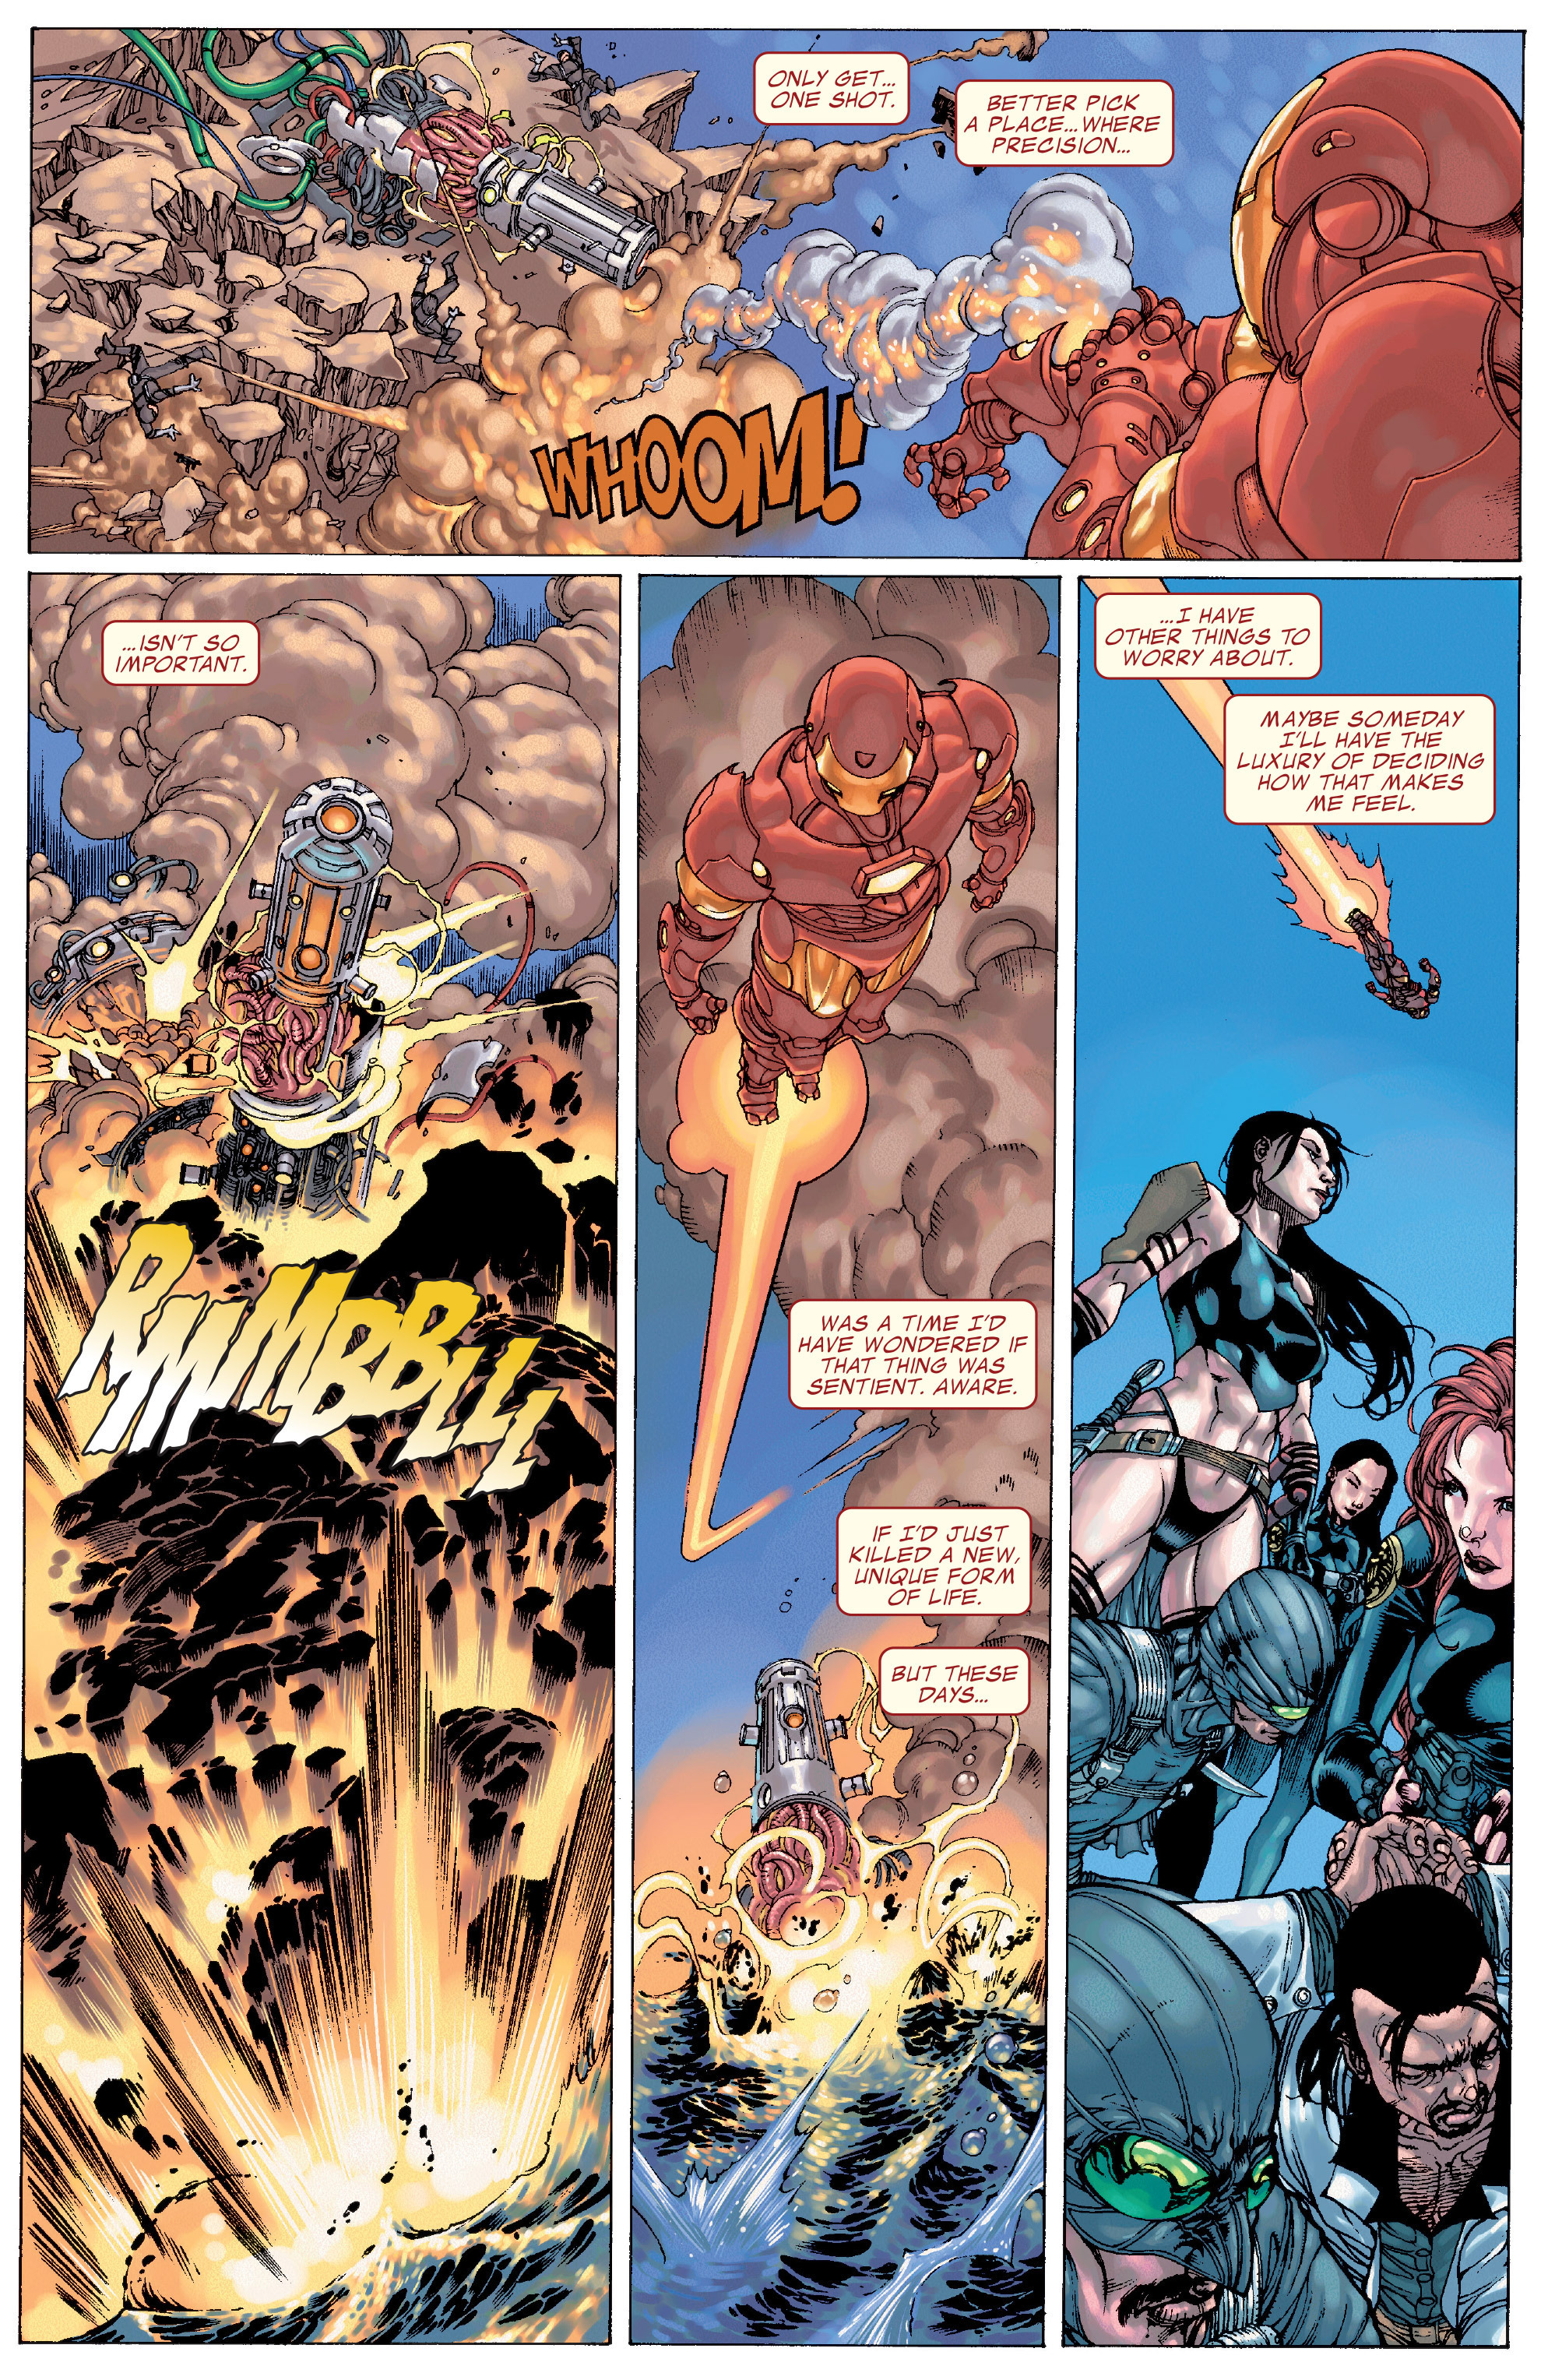 Iron Man: Director of S.H.I.E.L.D. Annual Full Page 38